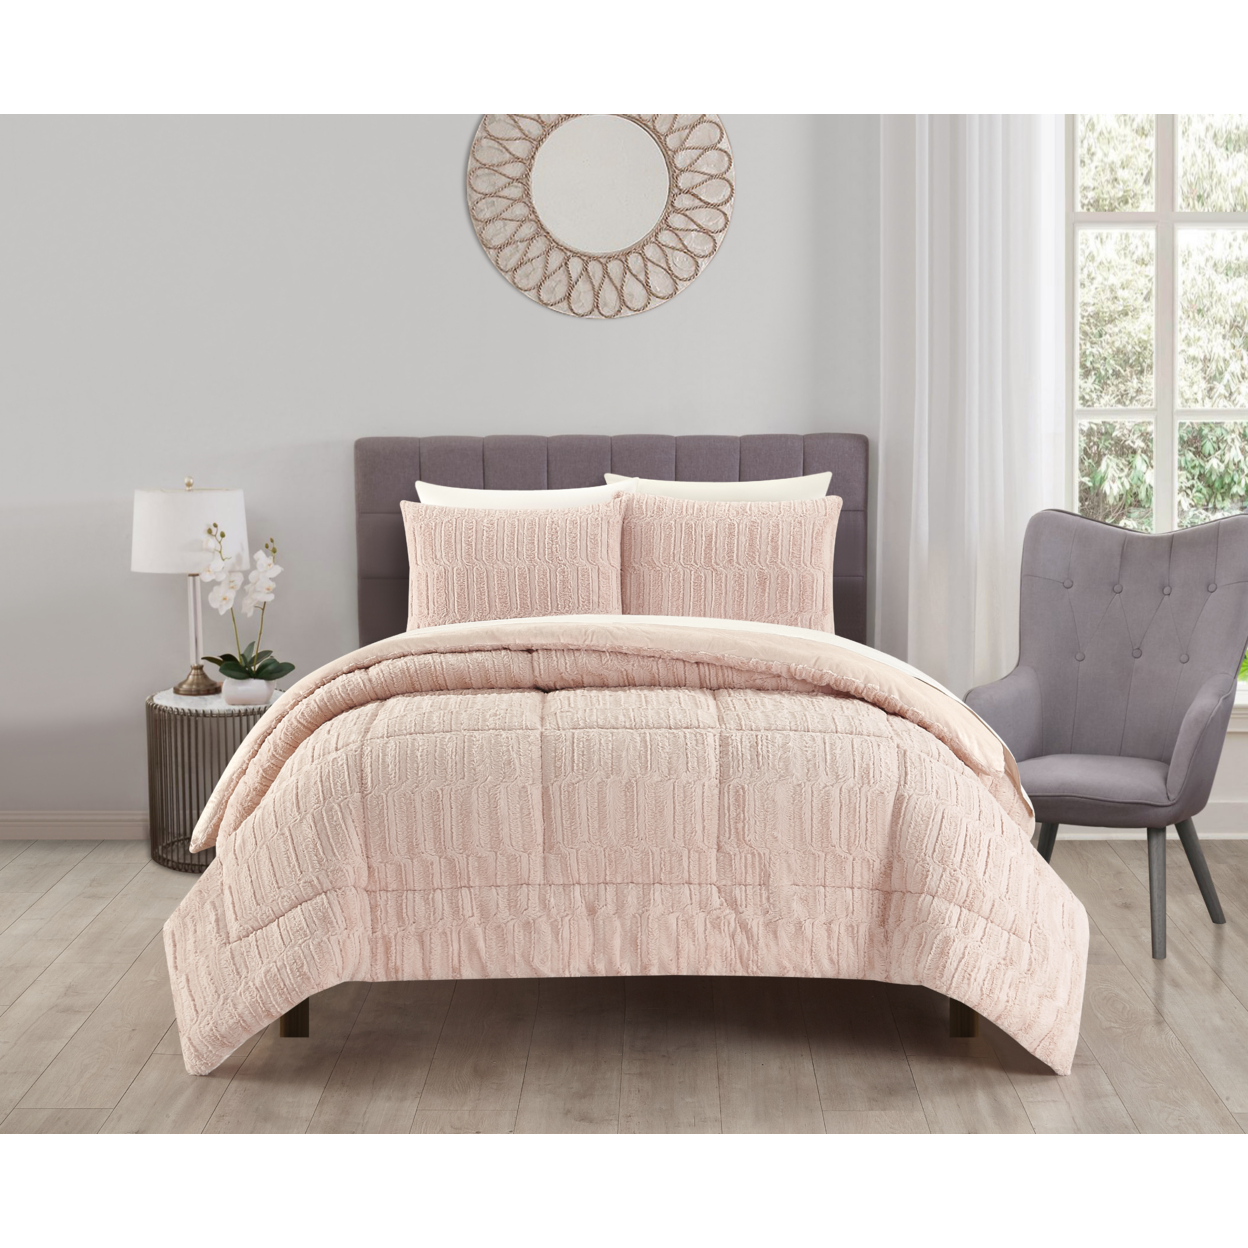 Farca 3 Or 2 Piece Comforter Textured Geometric Pattern Faux Micro-Mink Backing - Blush, King - 3 Piece